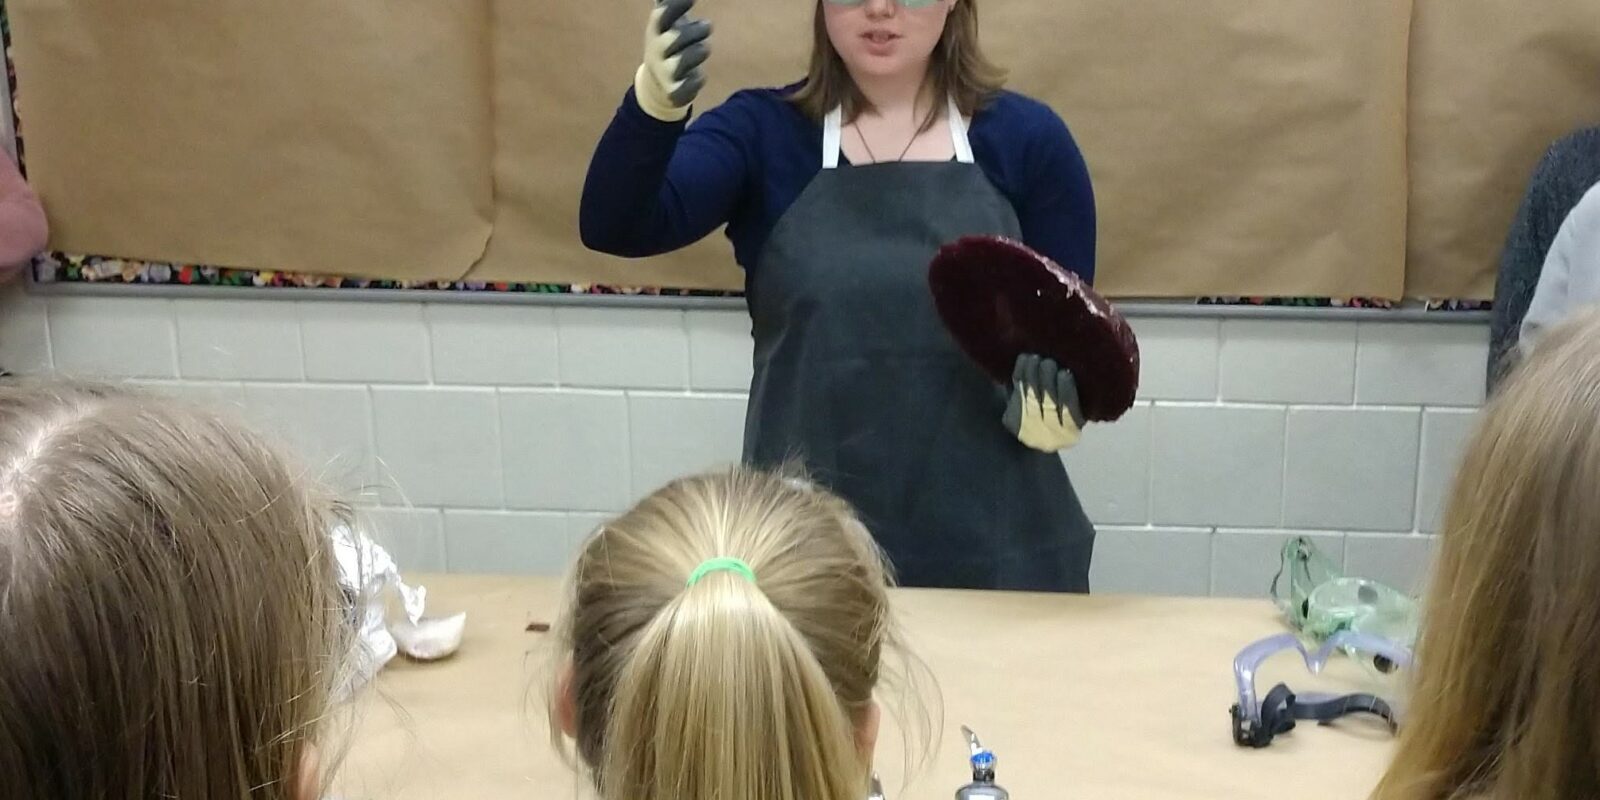 Volunteer, Erin Crowley, stands at the front of a classroom wearing safety goggles and gloves and holds a large piece of "obsidian" rock candy as she prepares to demonstrate to students how to flintknap.